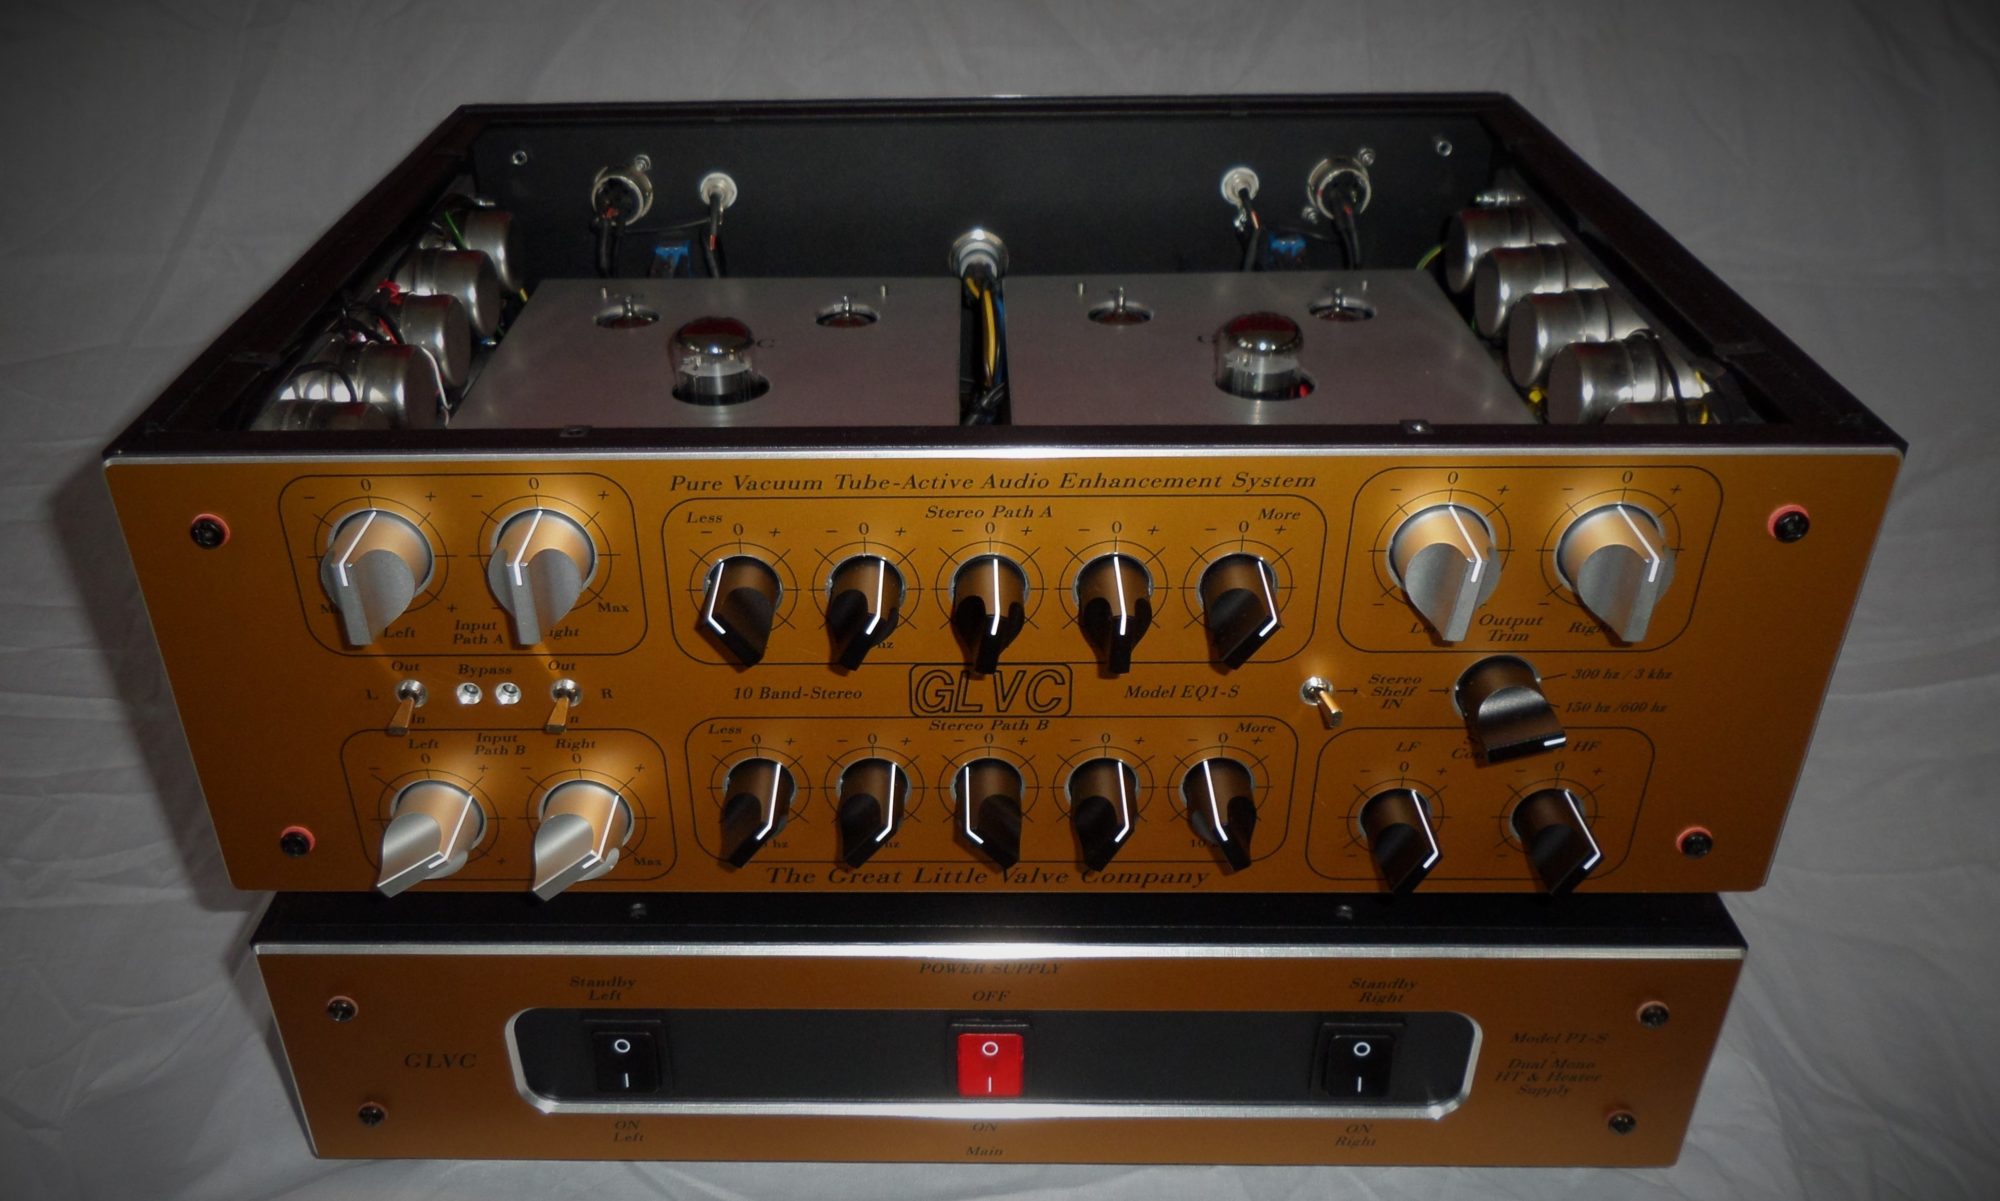  The ultimate analogue vacuum tube tone control system